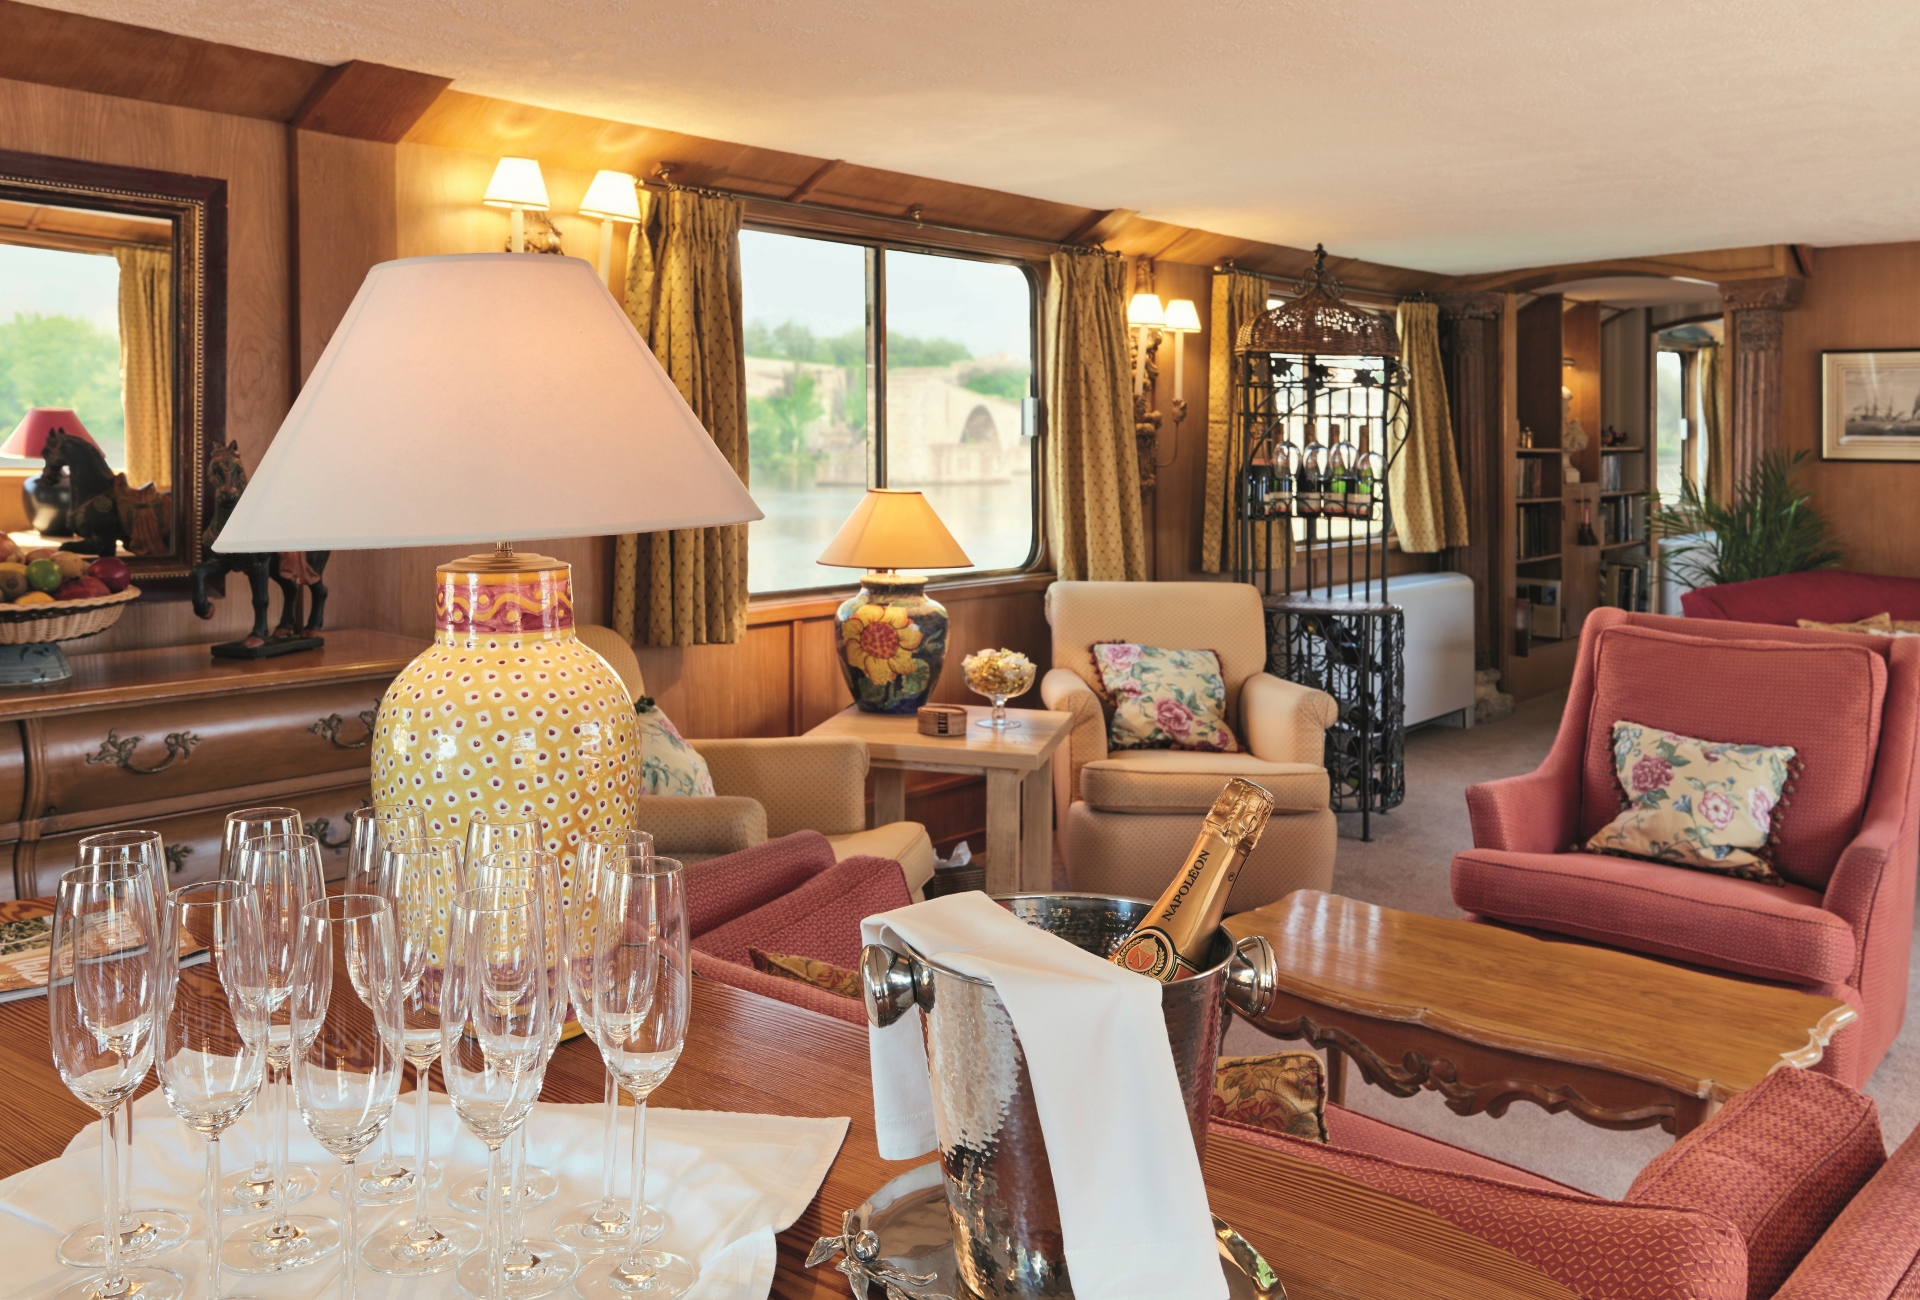 Belmond Napoleon guest lounge - The French waterways by luxury barge